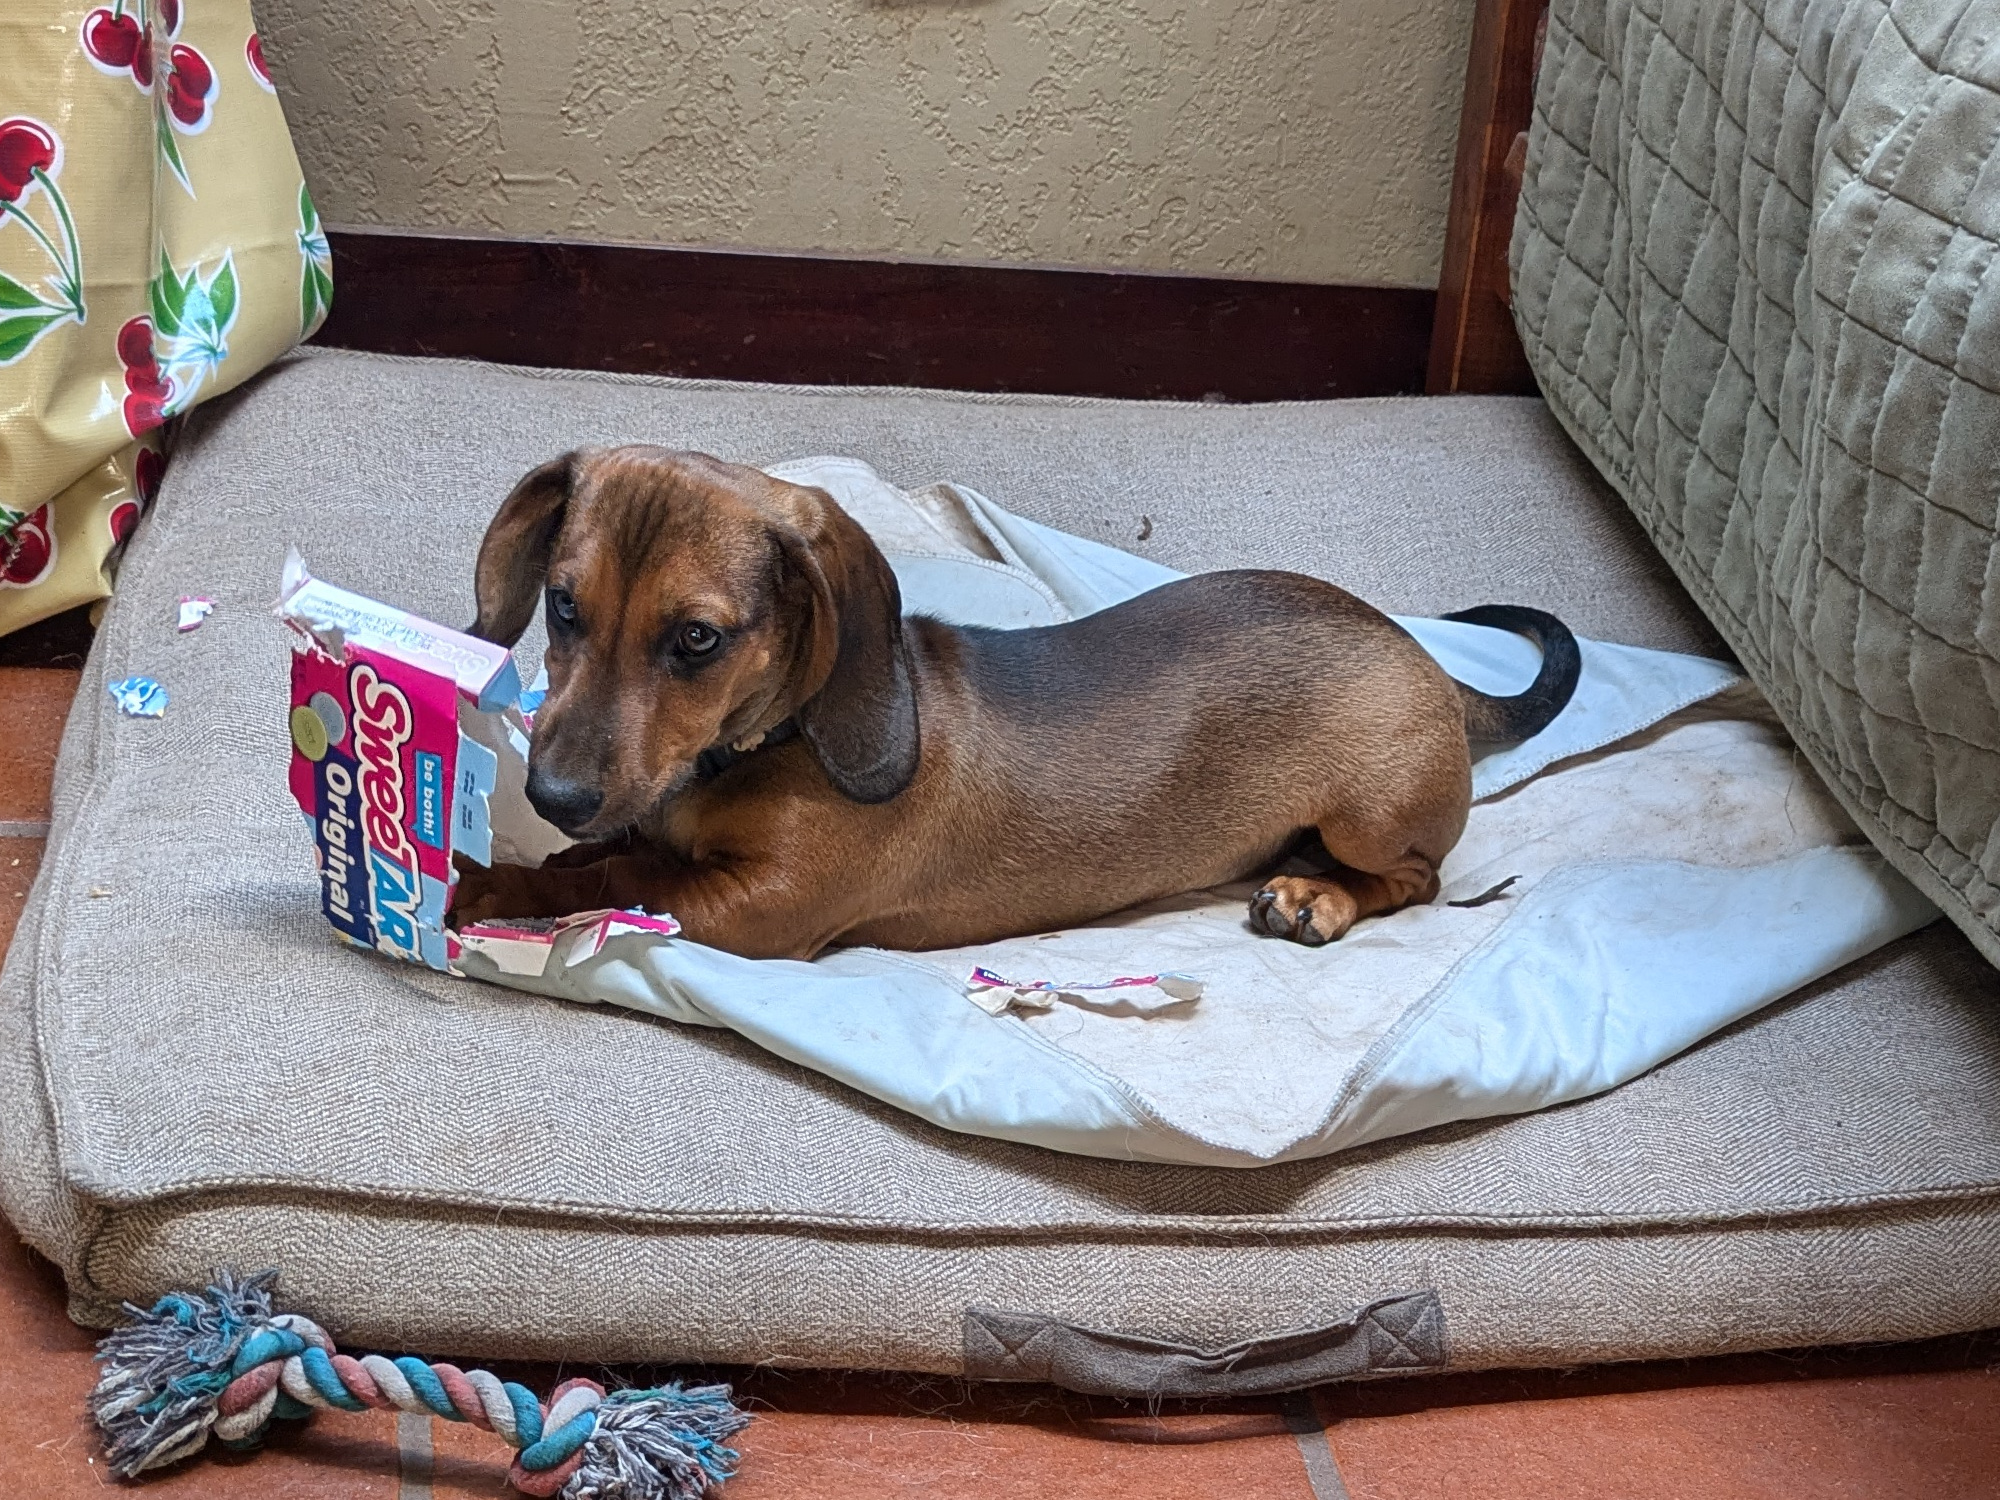 A dachshund puppy playing with an empty candy box